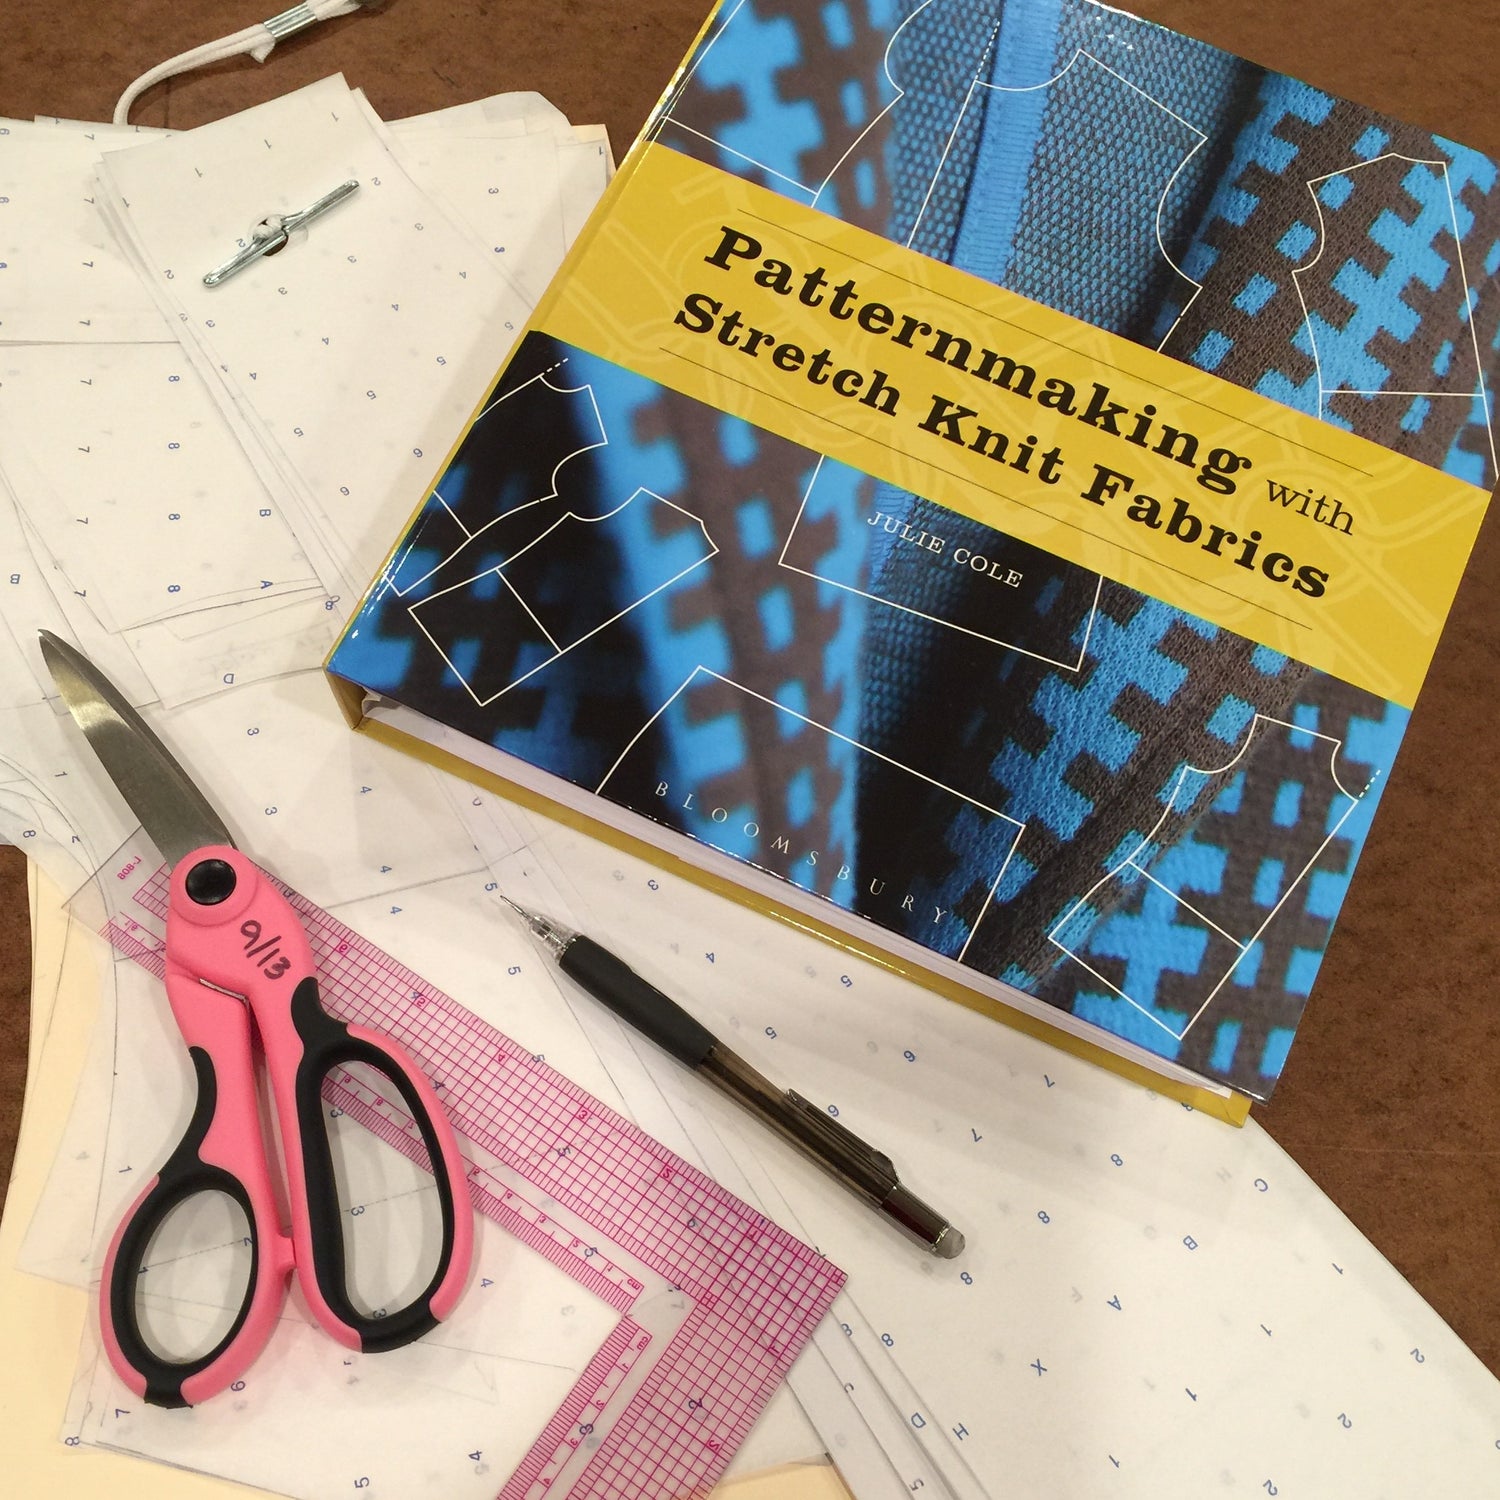 Book Review #1 - Patternmaking with Stretch Knit Fabrics by Julie Cole